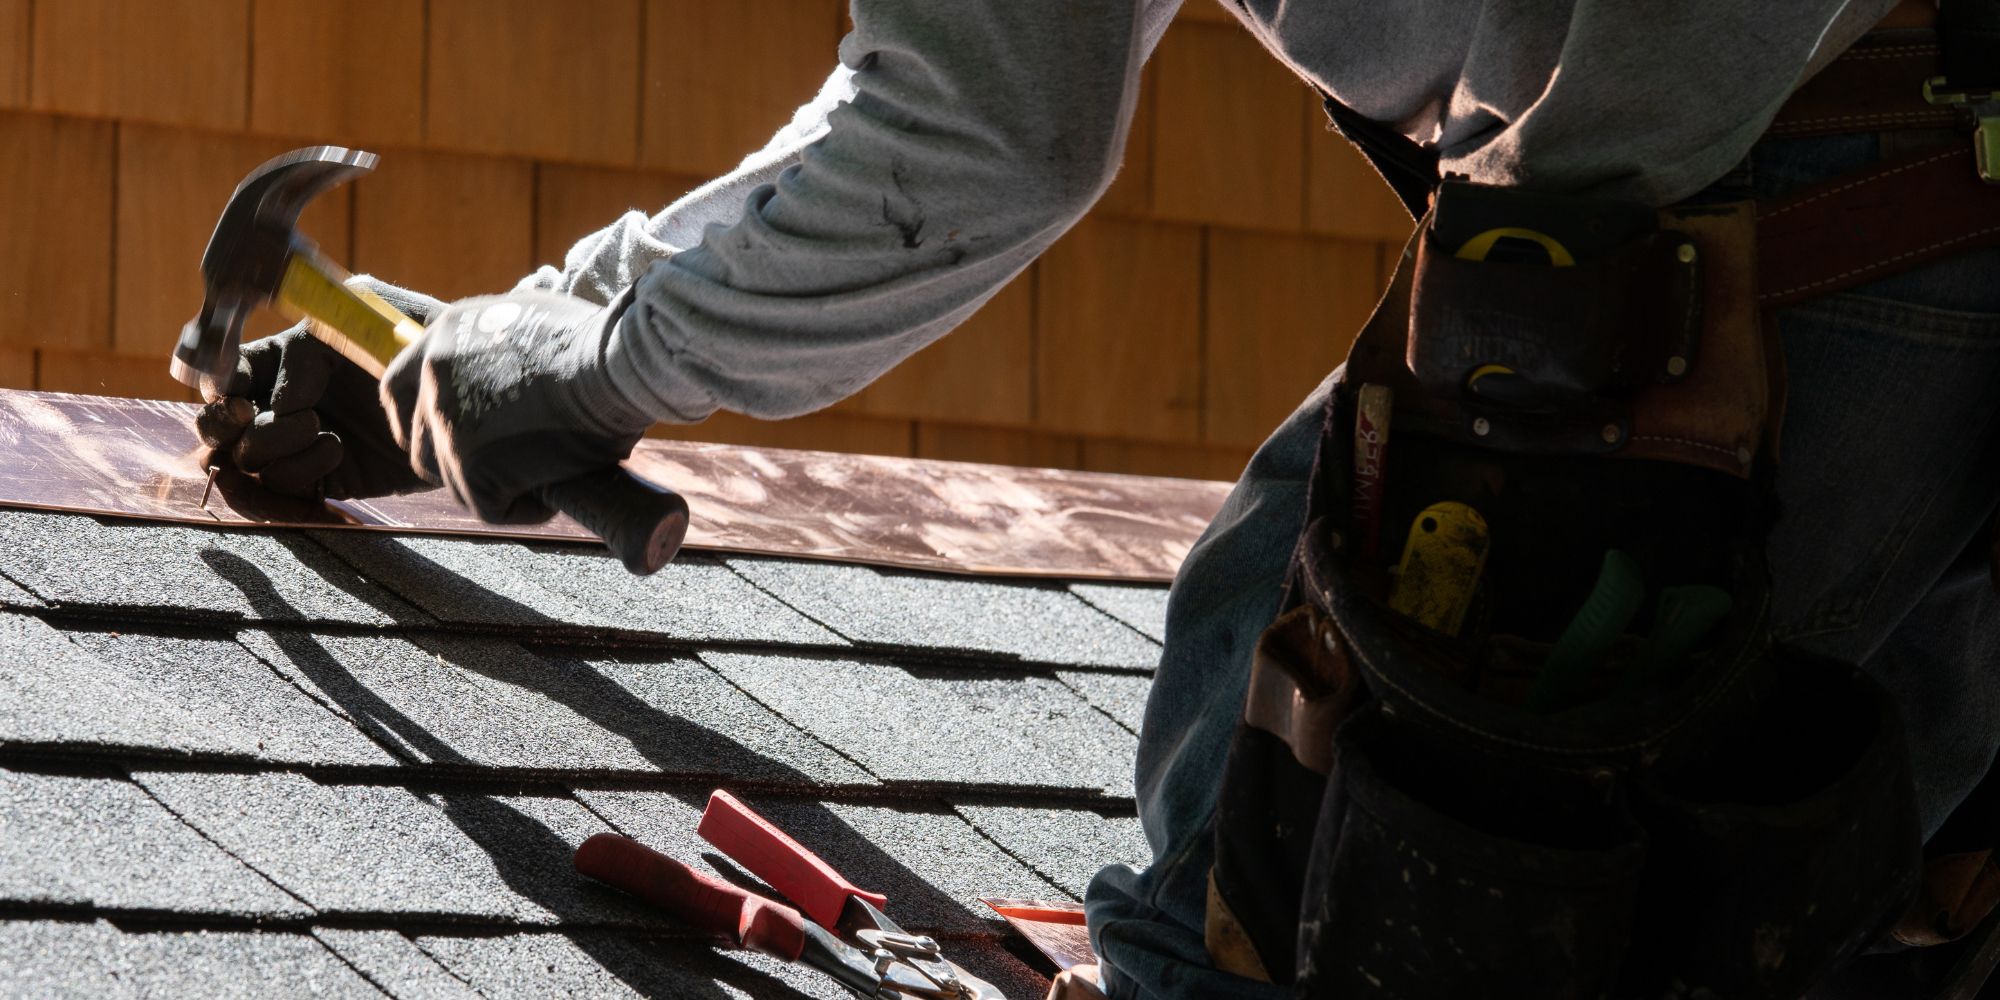 Why We Offer the Best Roof Repair In Denver